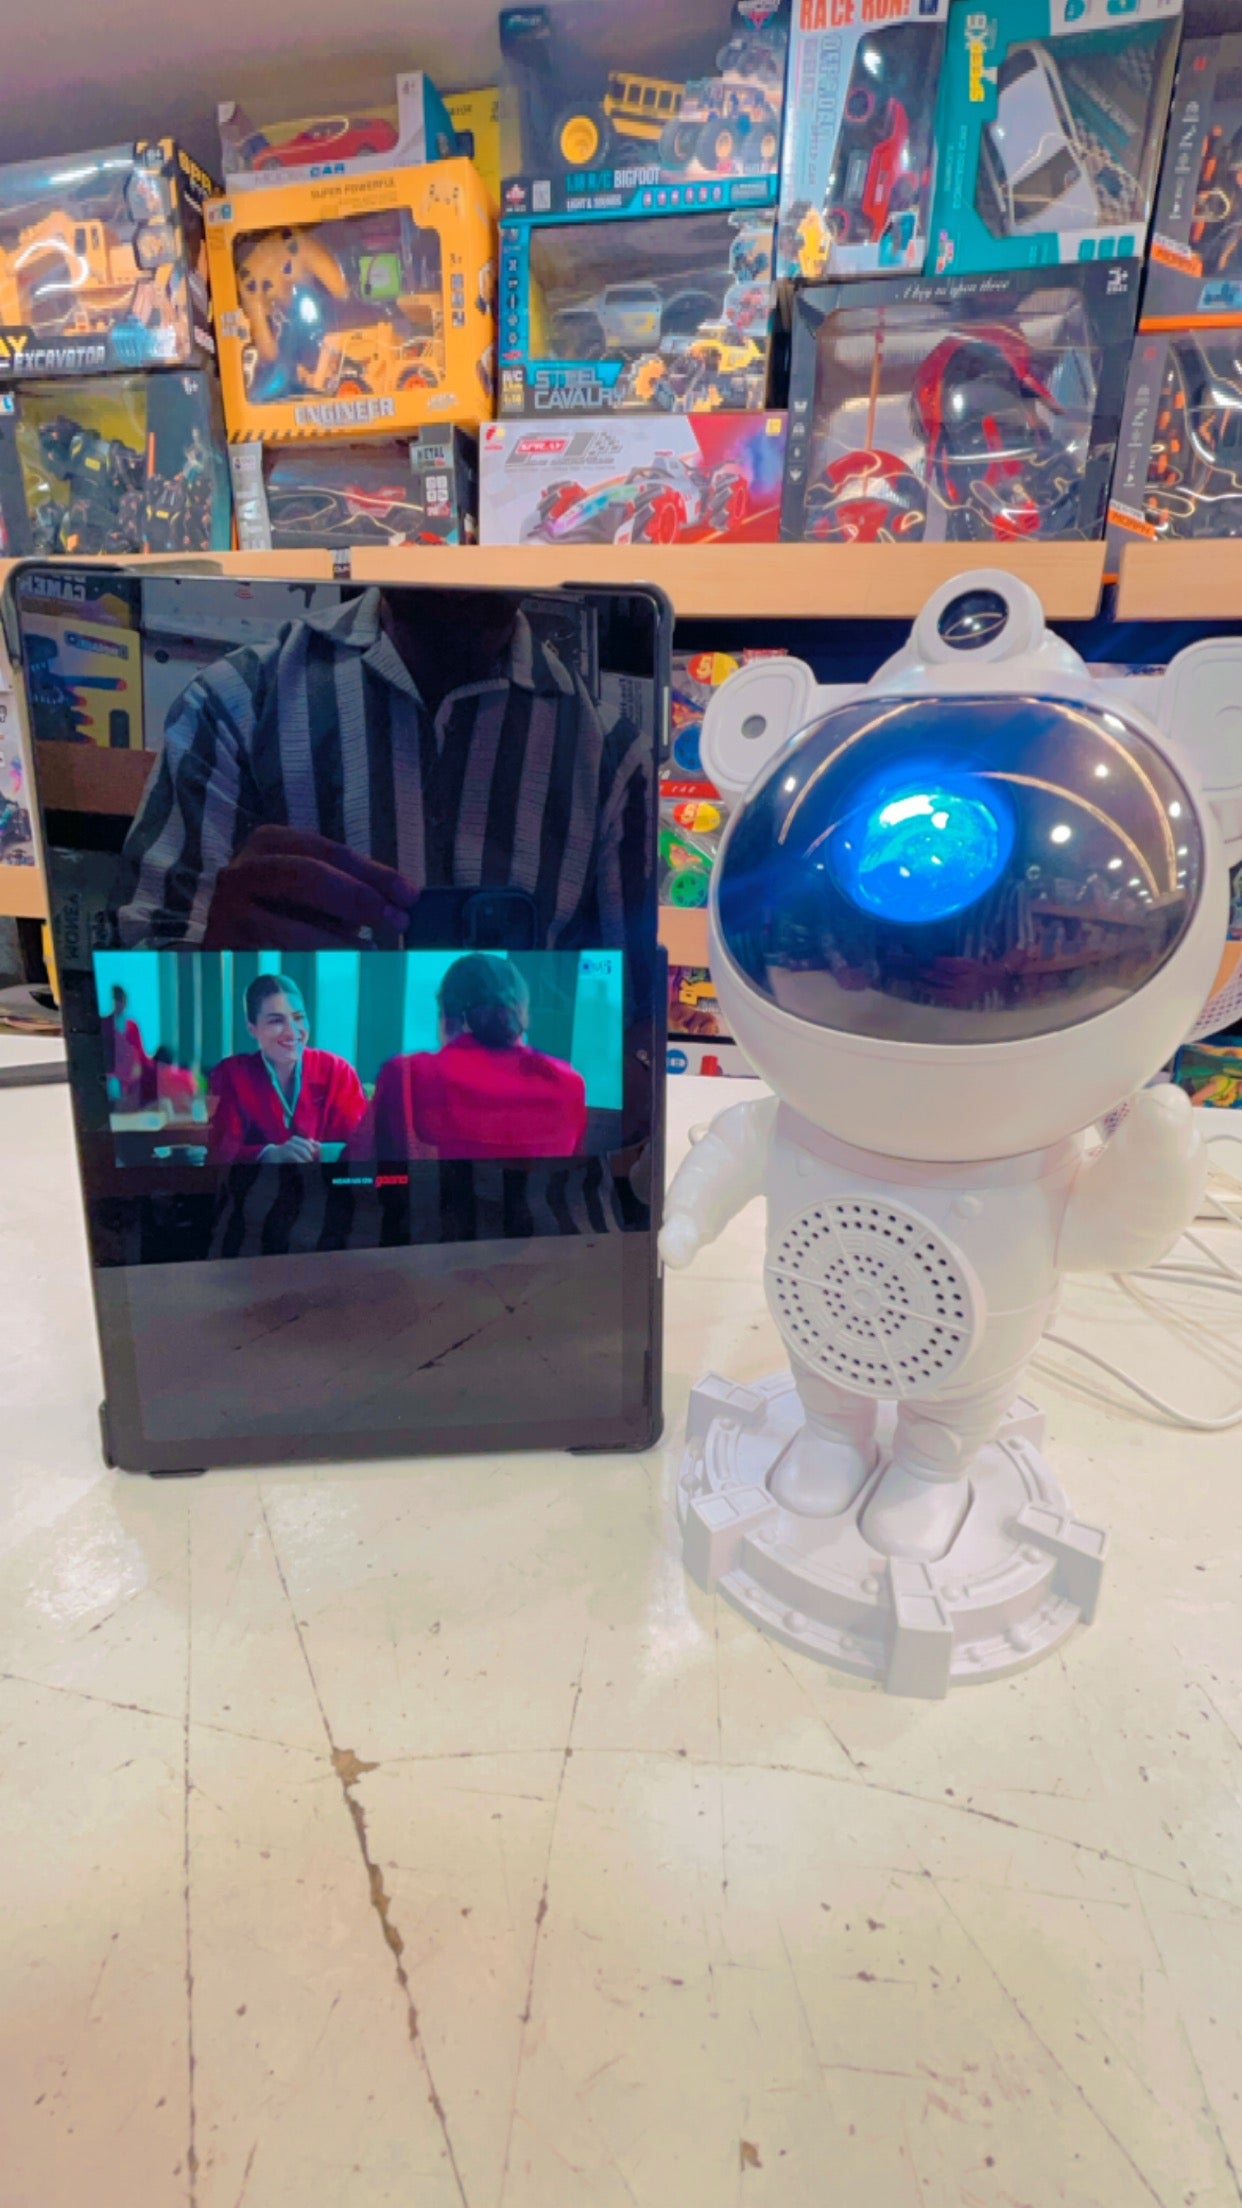 Bluetooth Astronaut Star Led Projector with real moon  Night Light with Timer Remote Control and 360°Adjustable Design Nebula Galaxy